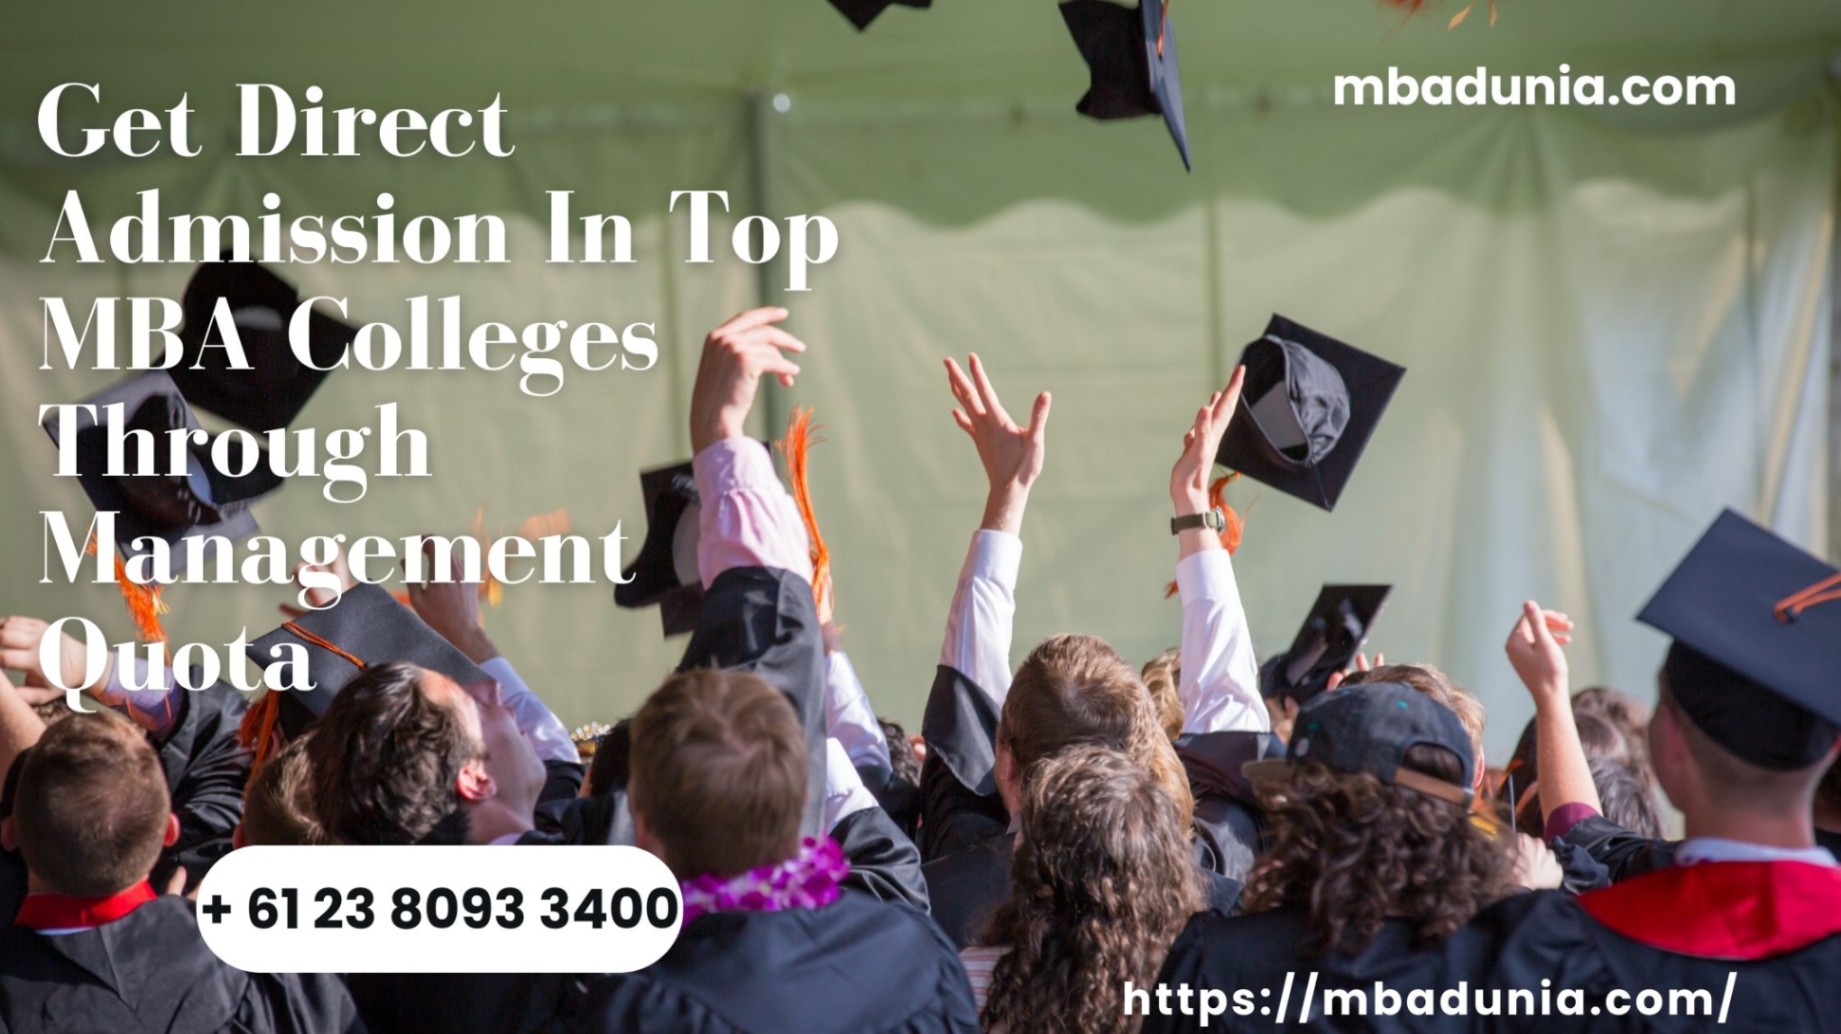 Get Direct Admission In Top MBA Colleges Through Management Quota